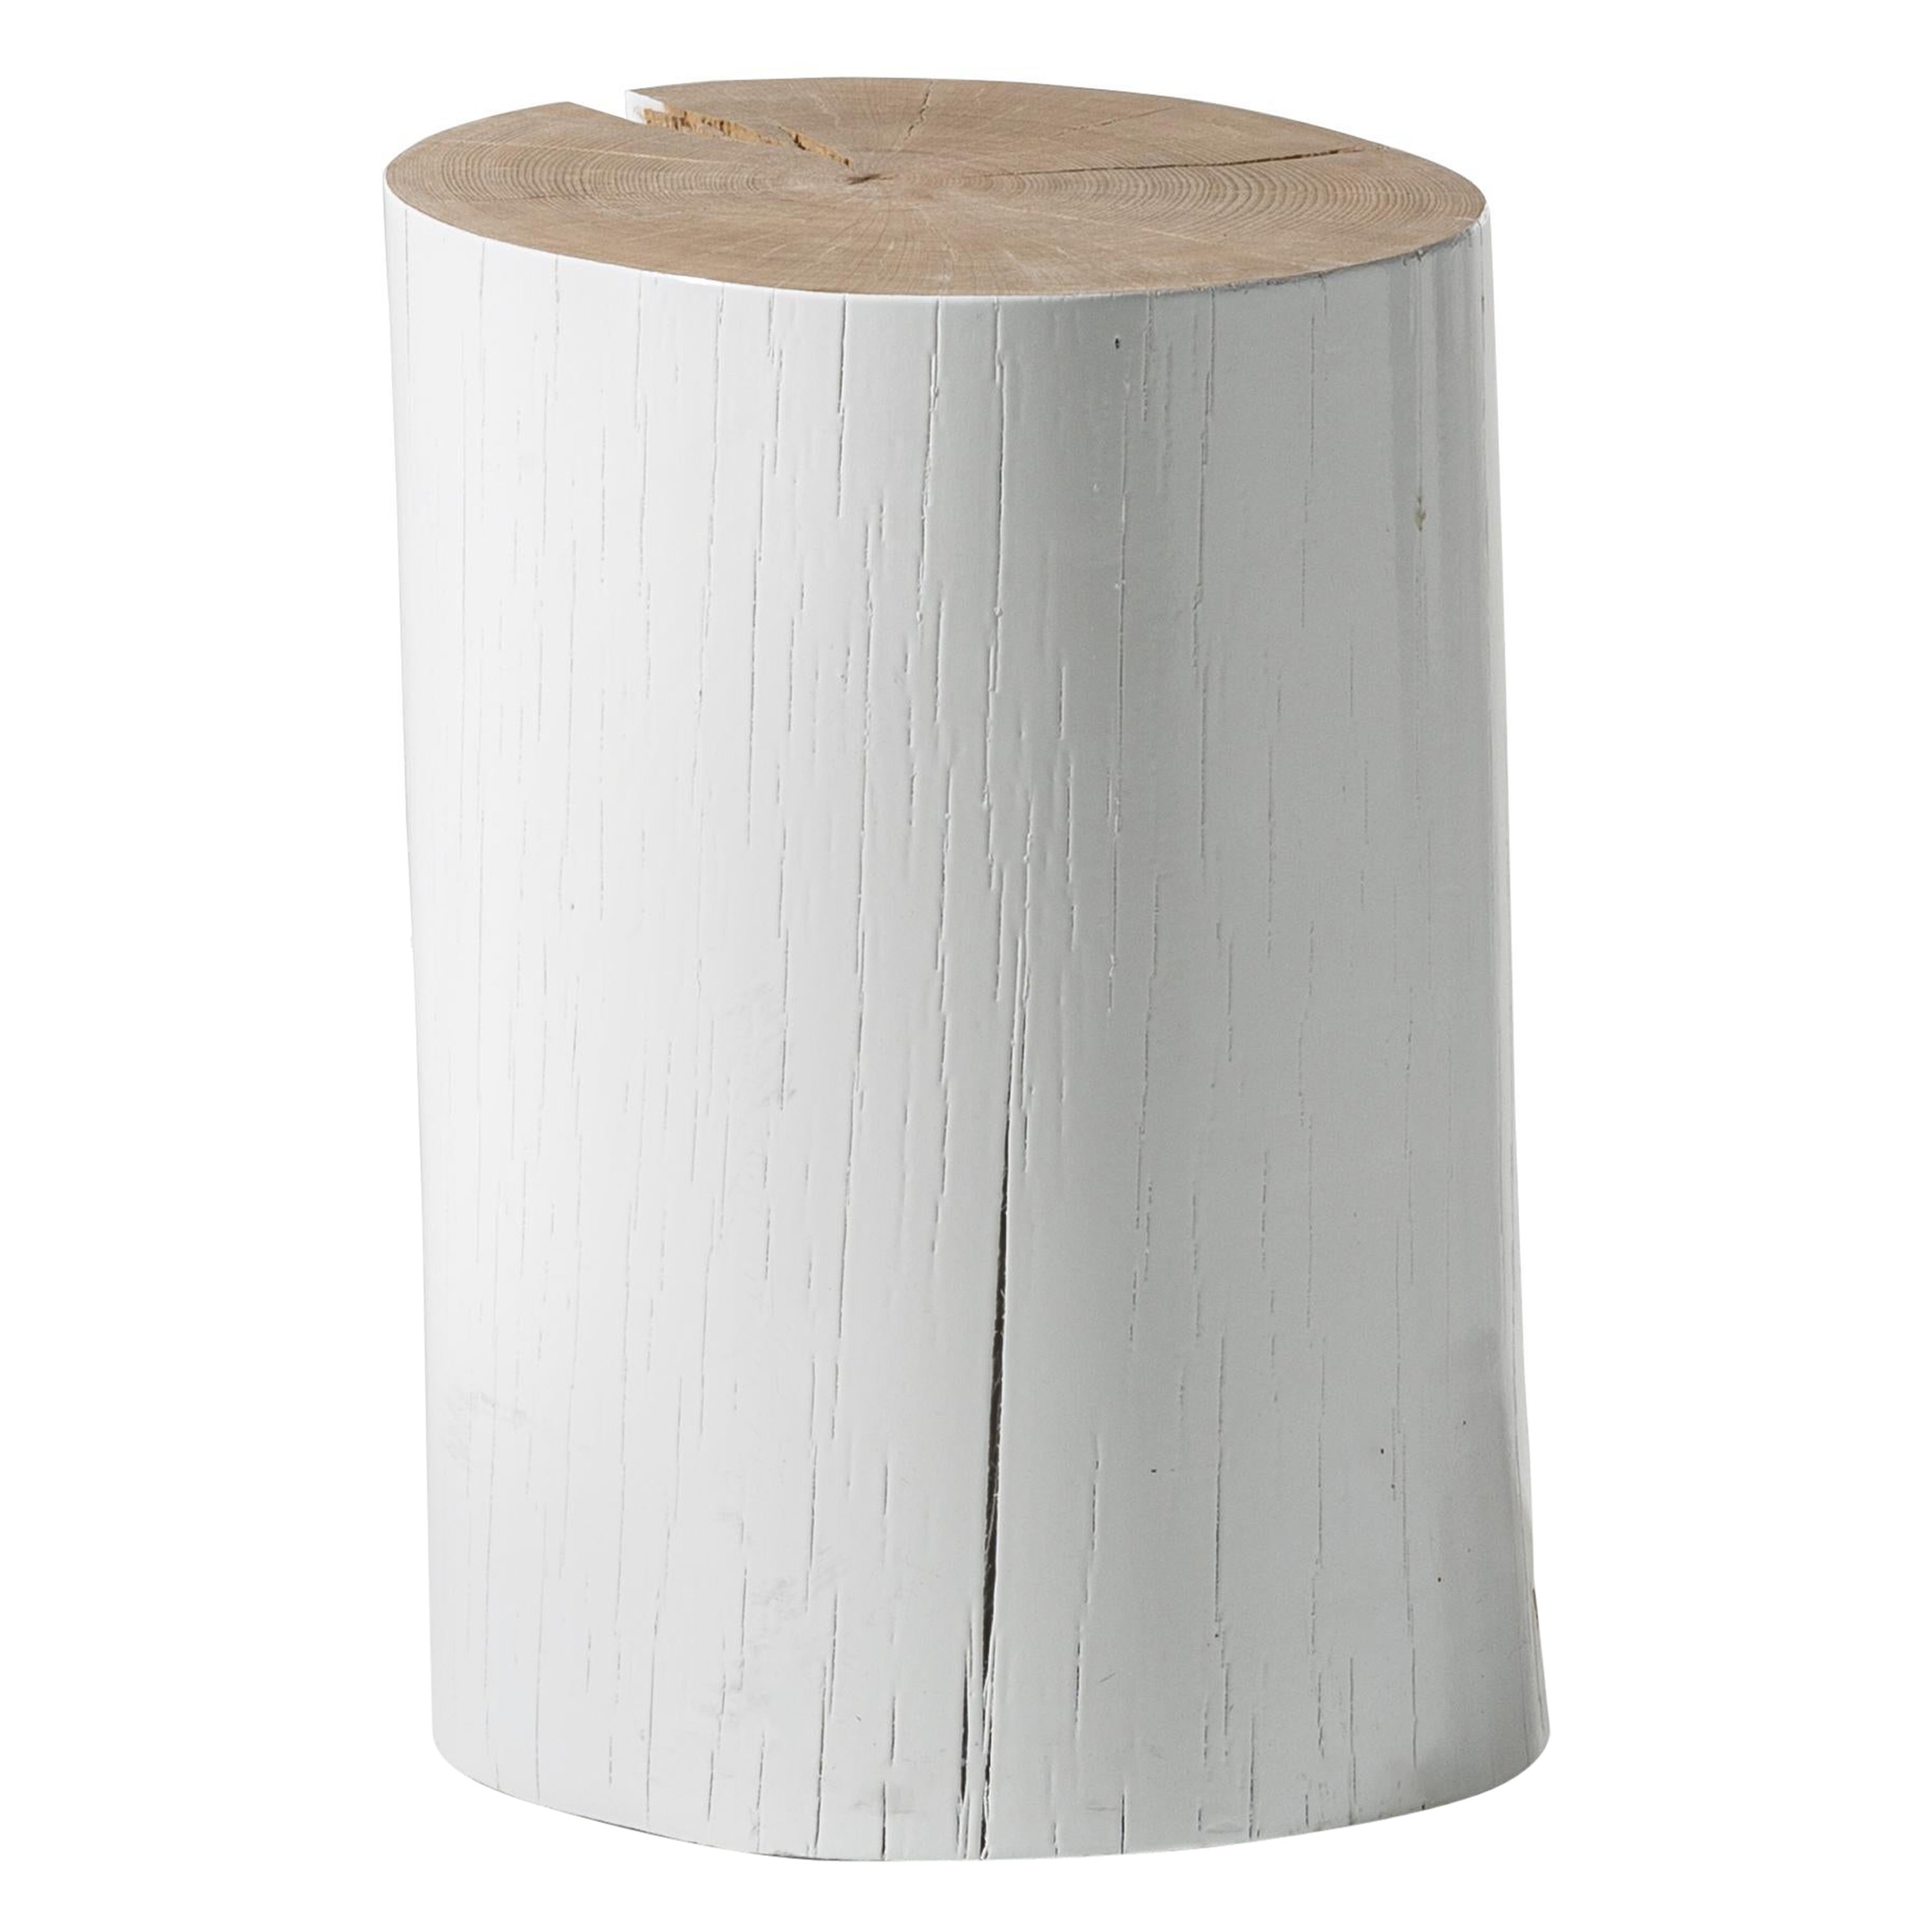 Gervasoni Small Log Sections of Beech Trunk Side Table in White by Paola Navone